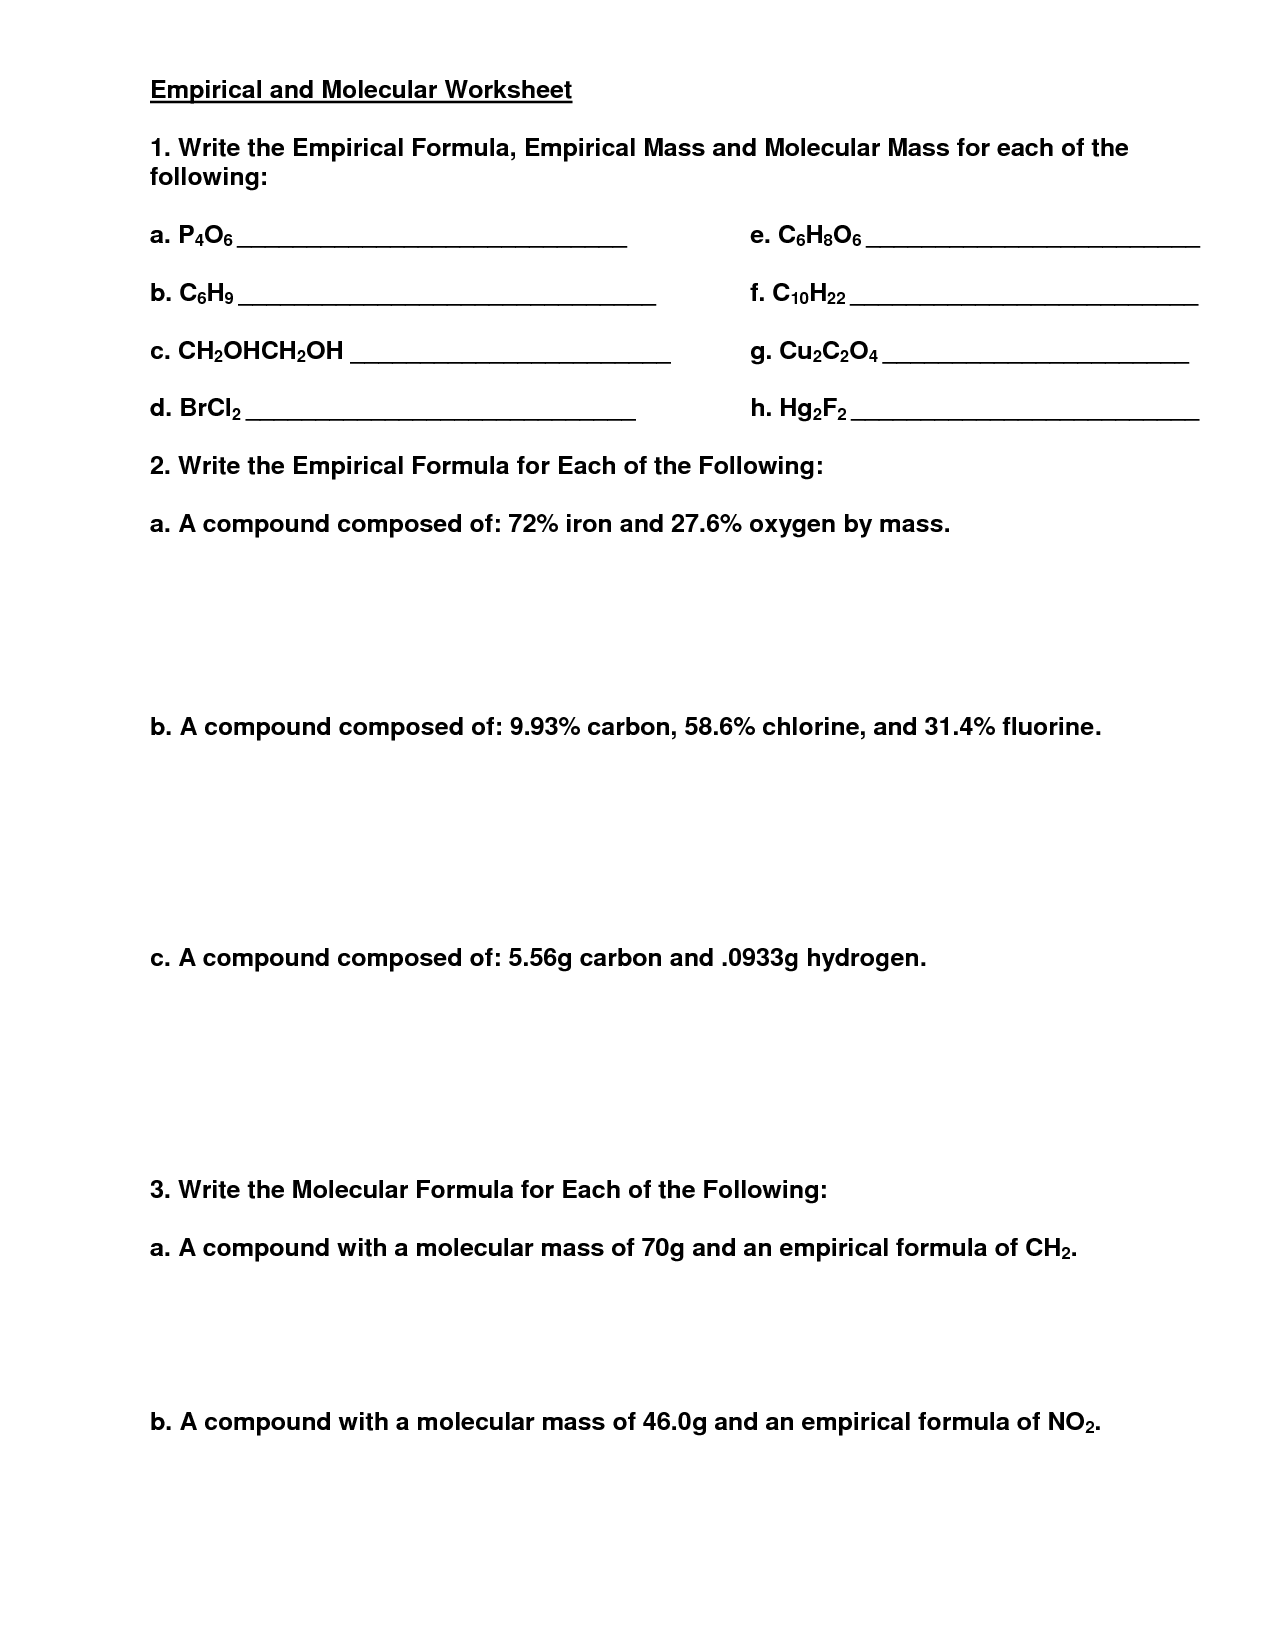 11-best-images-of-molecular-formula-worksheet-with-answers-molecular